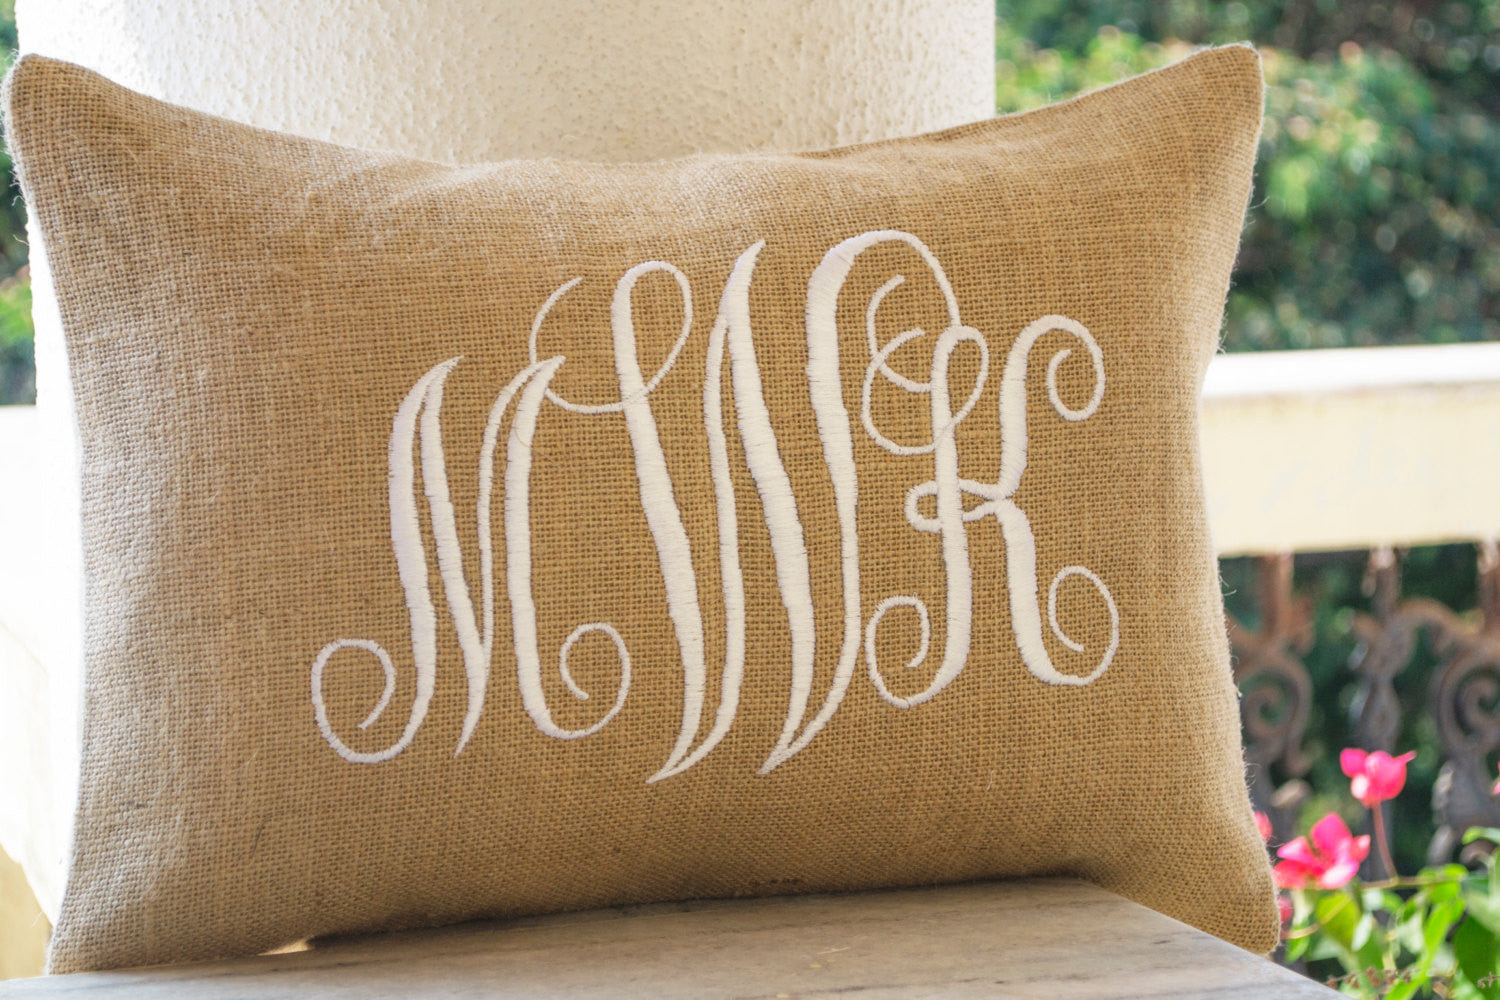 Burlap pillows with personalized monogram